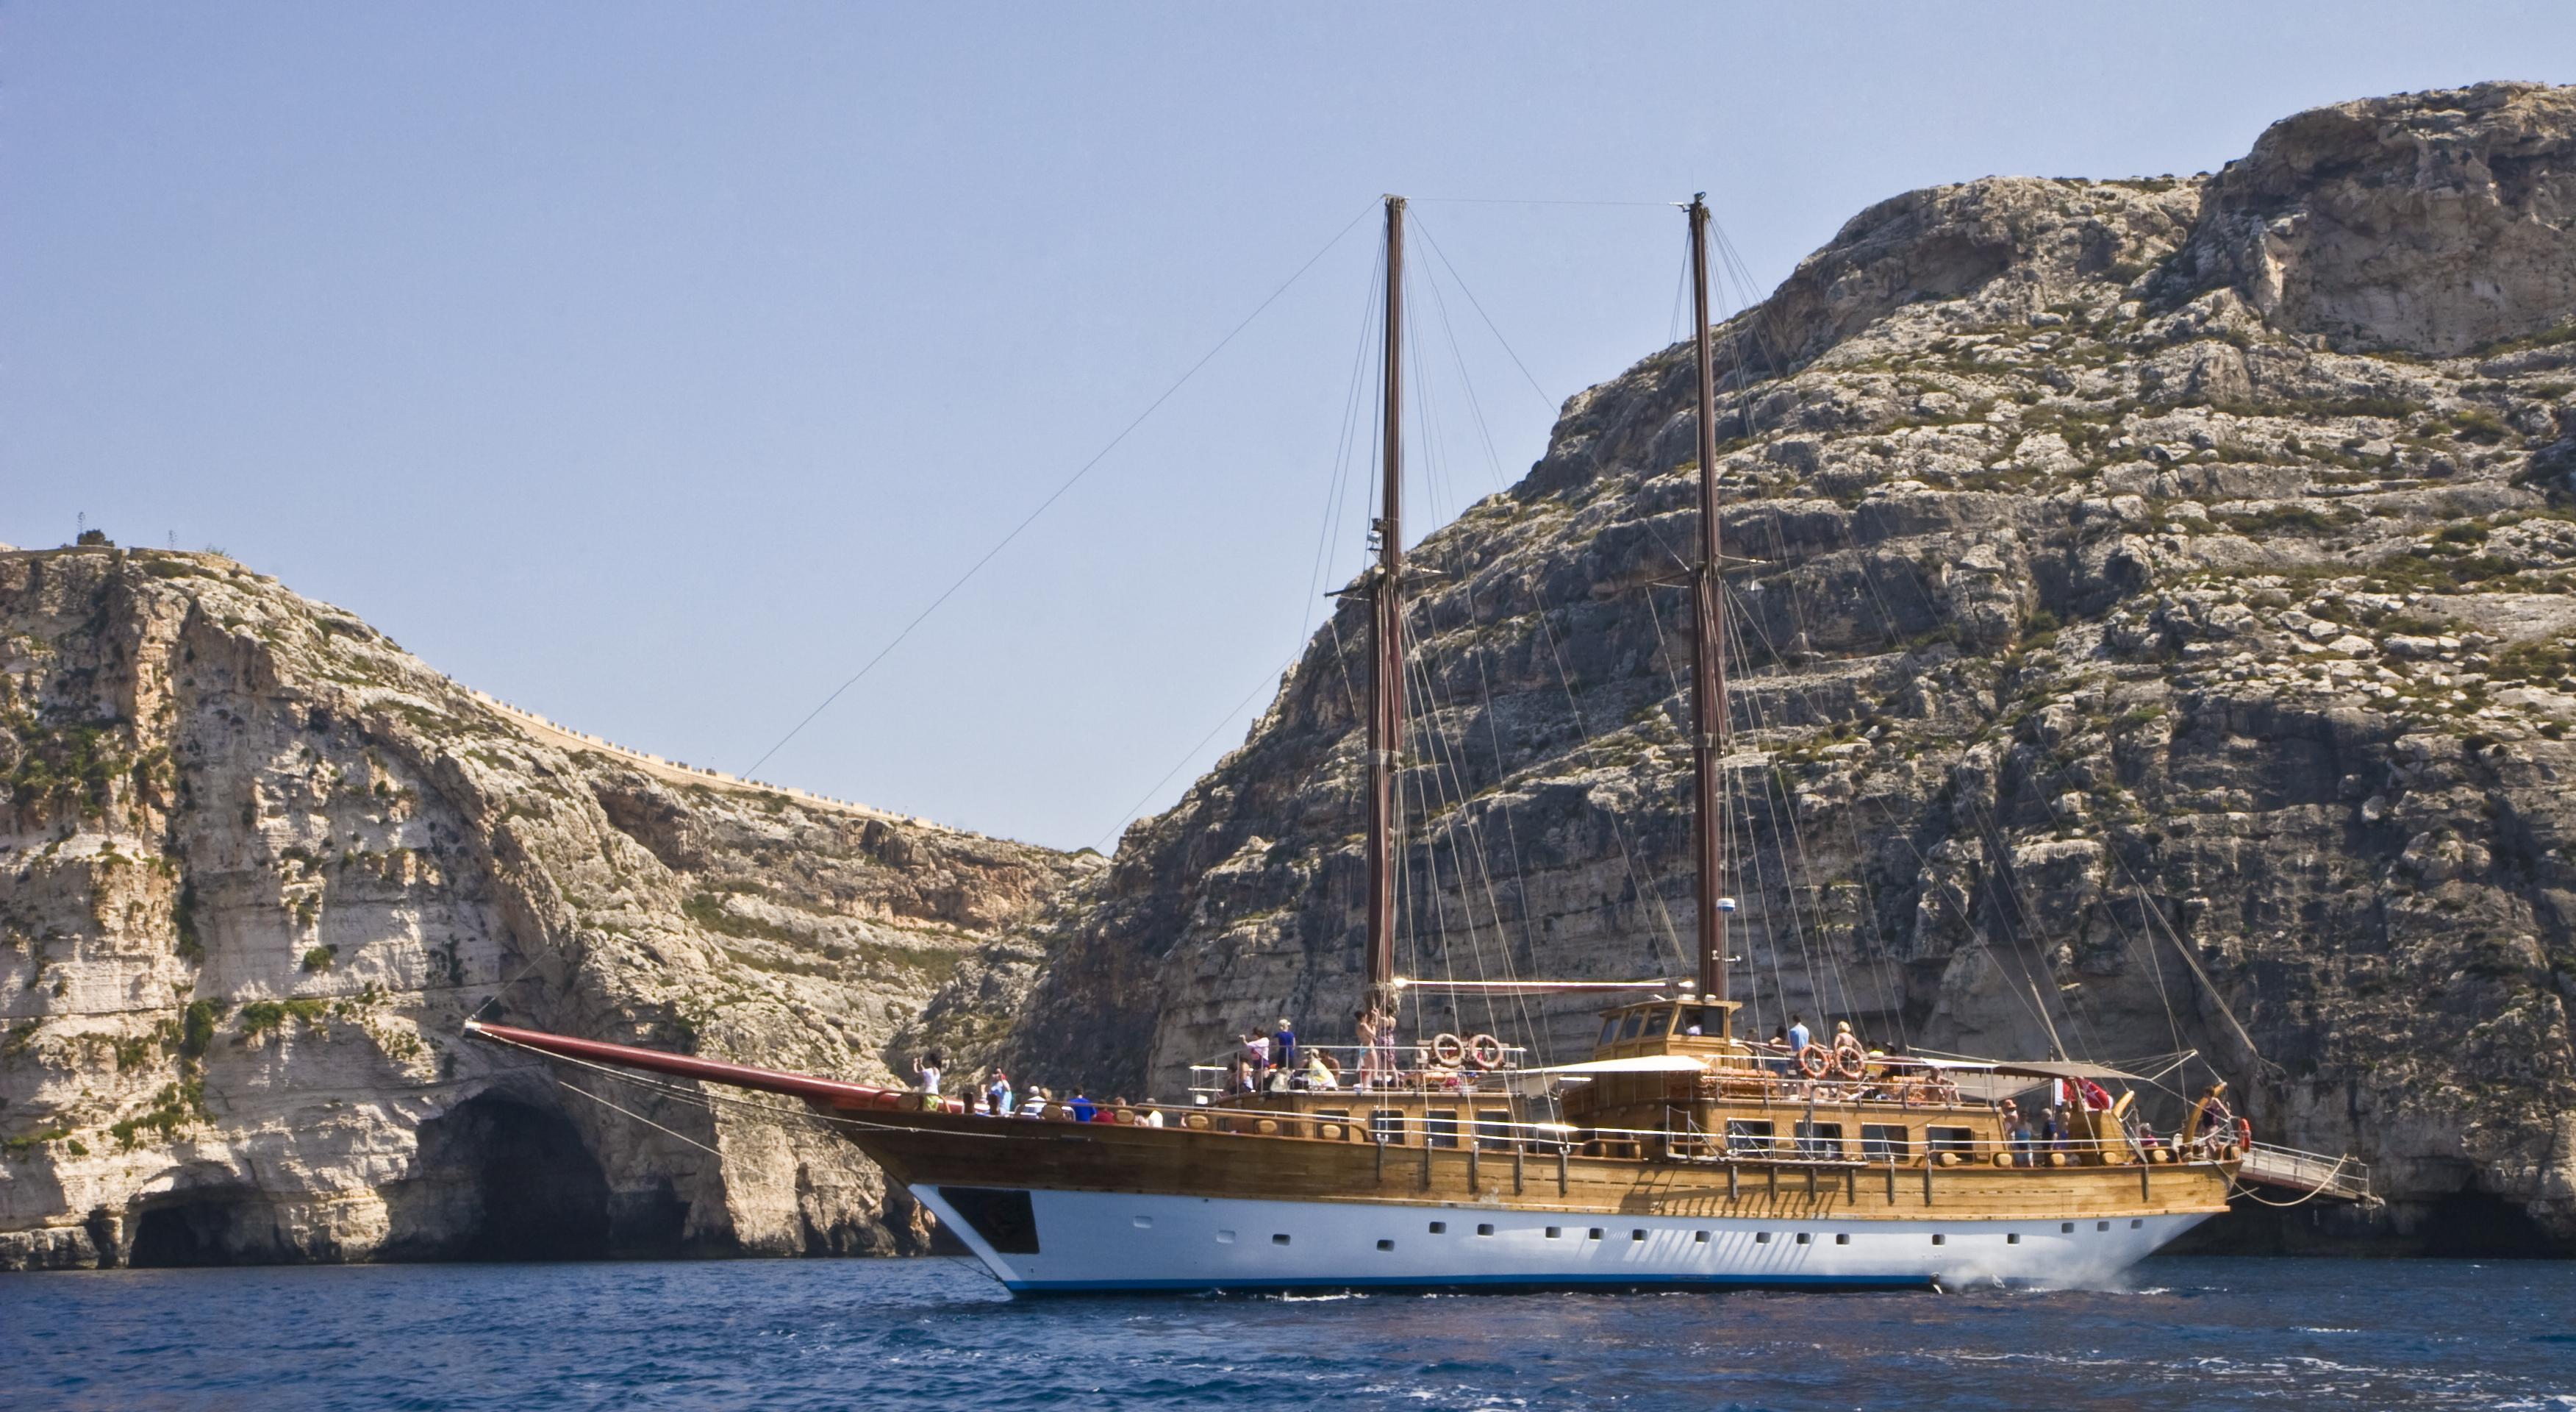 Lunch cruise on a sail-boat to Comino - Departing from Malta